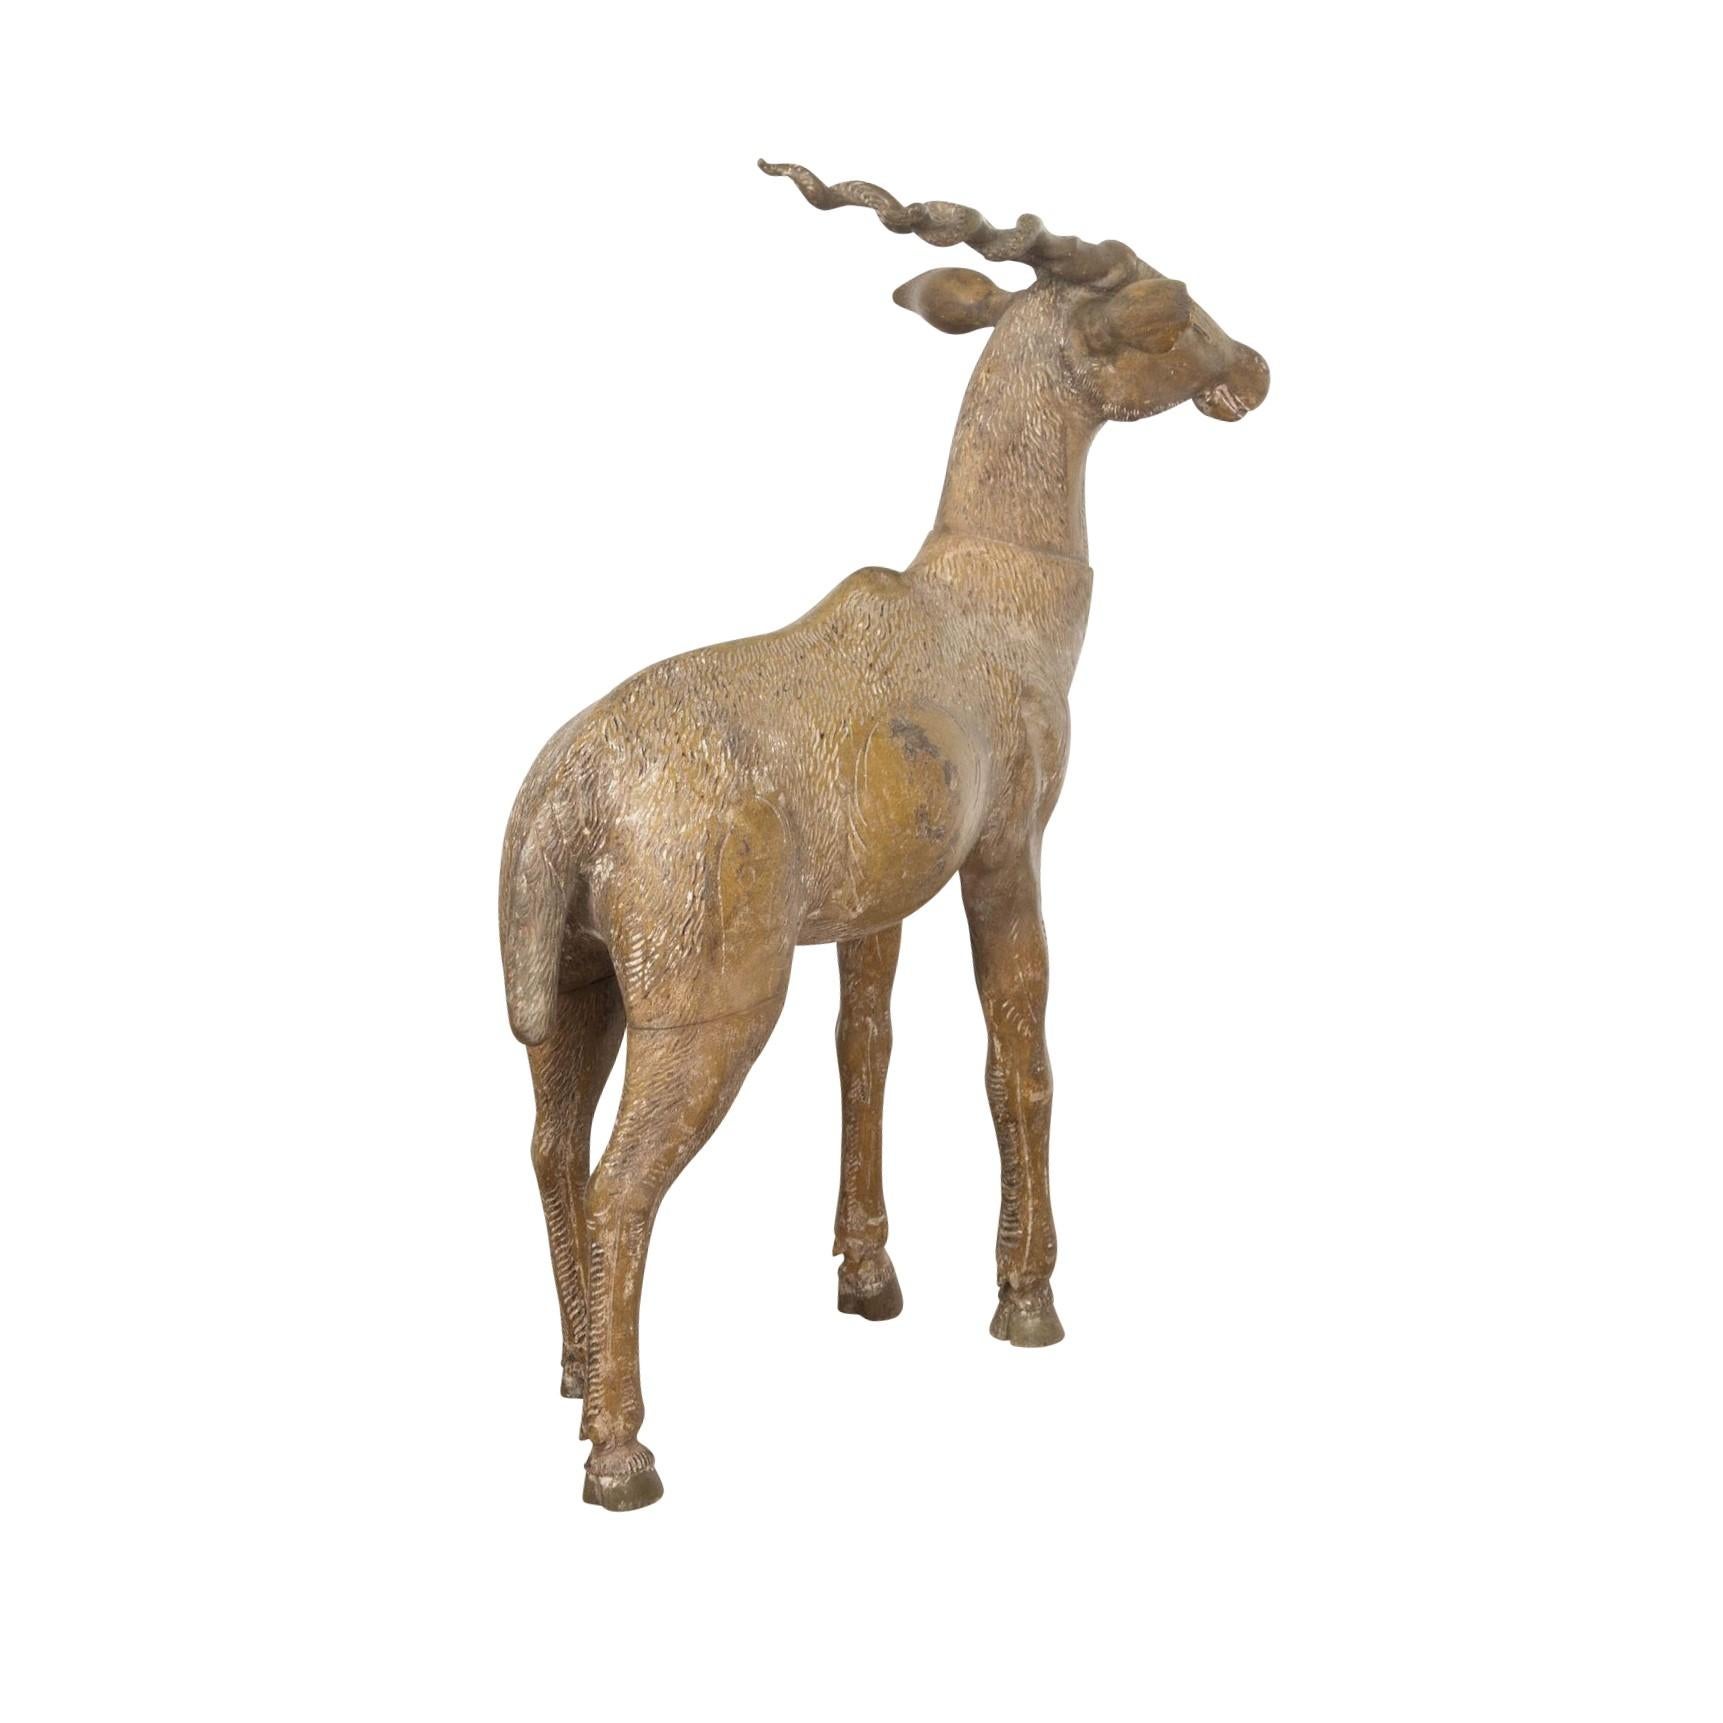 Lifesize 19th Century Quirky Carved Wood Antelope For Sale 2